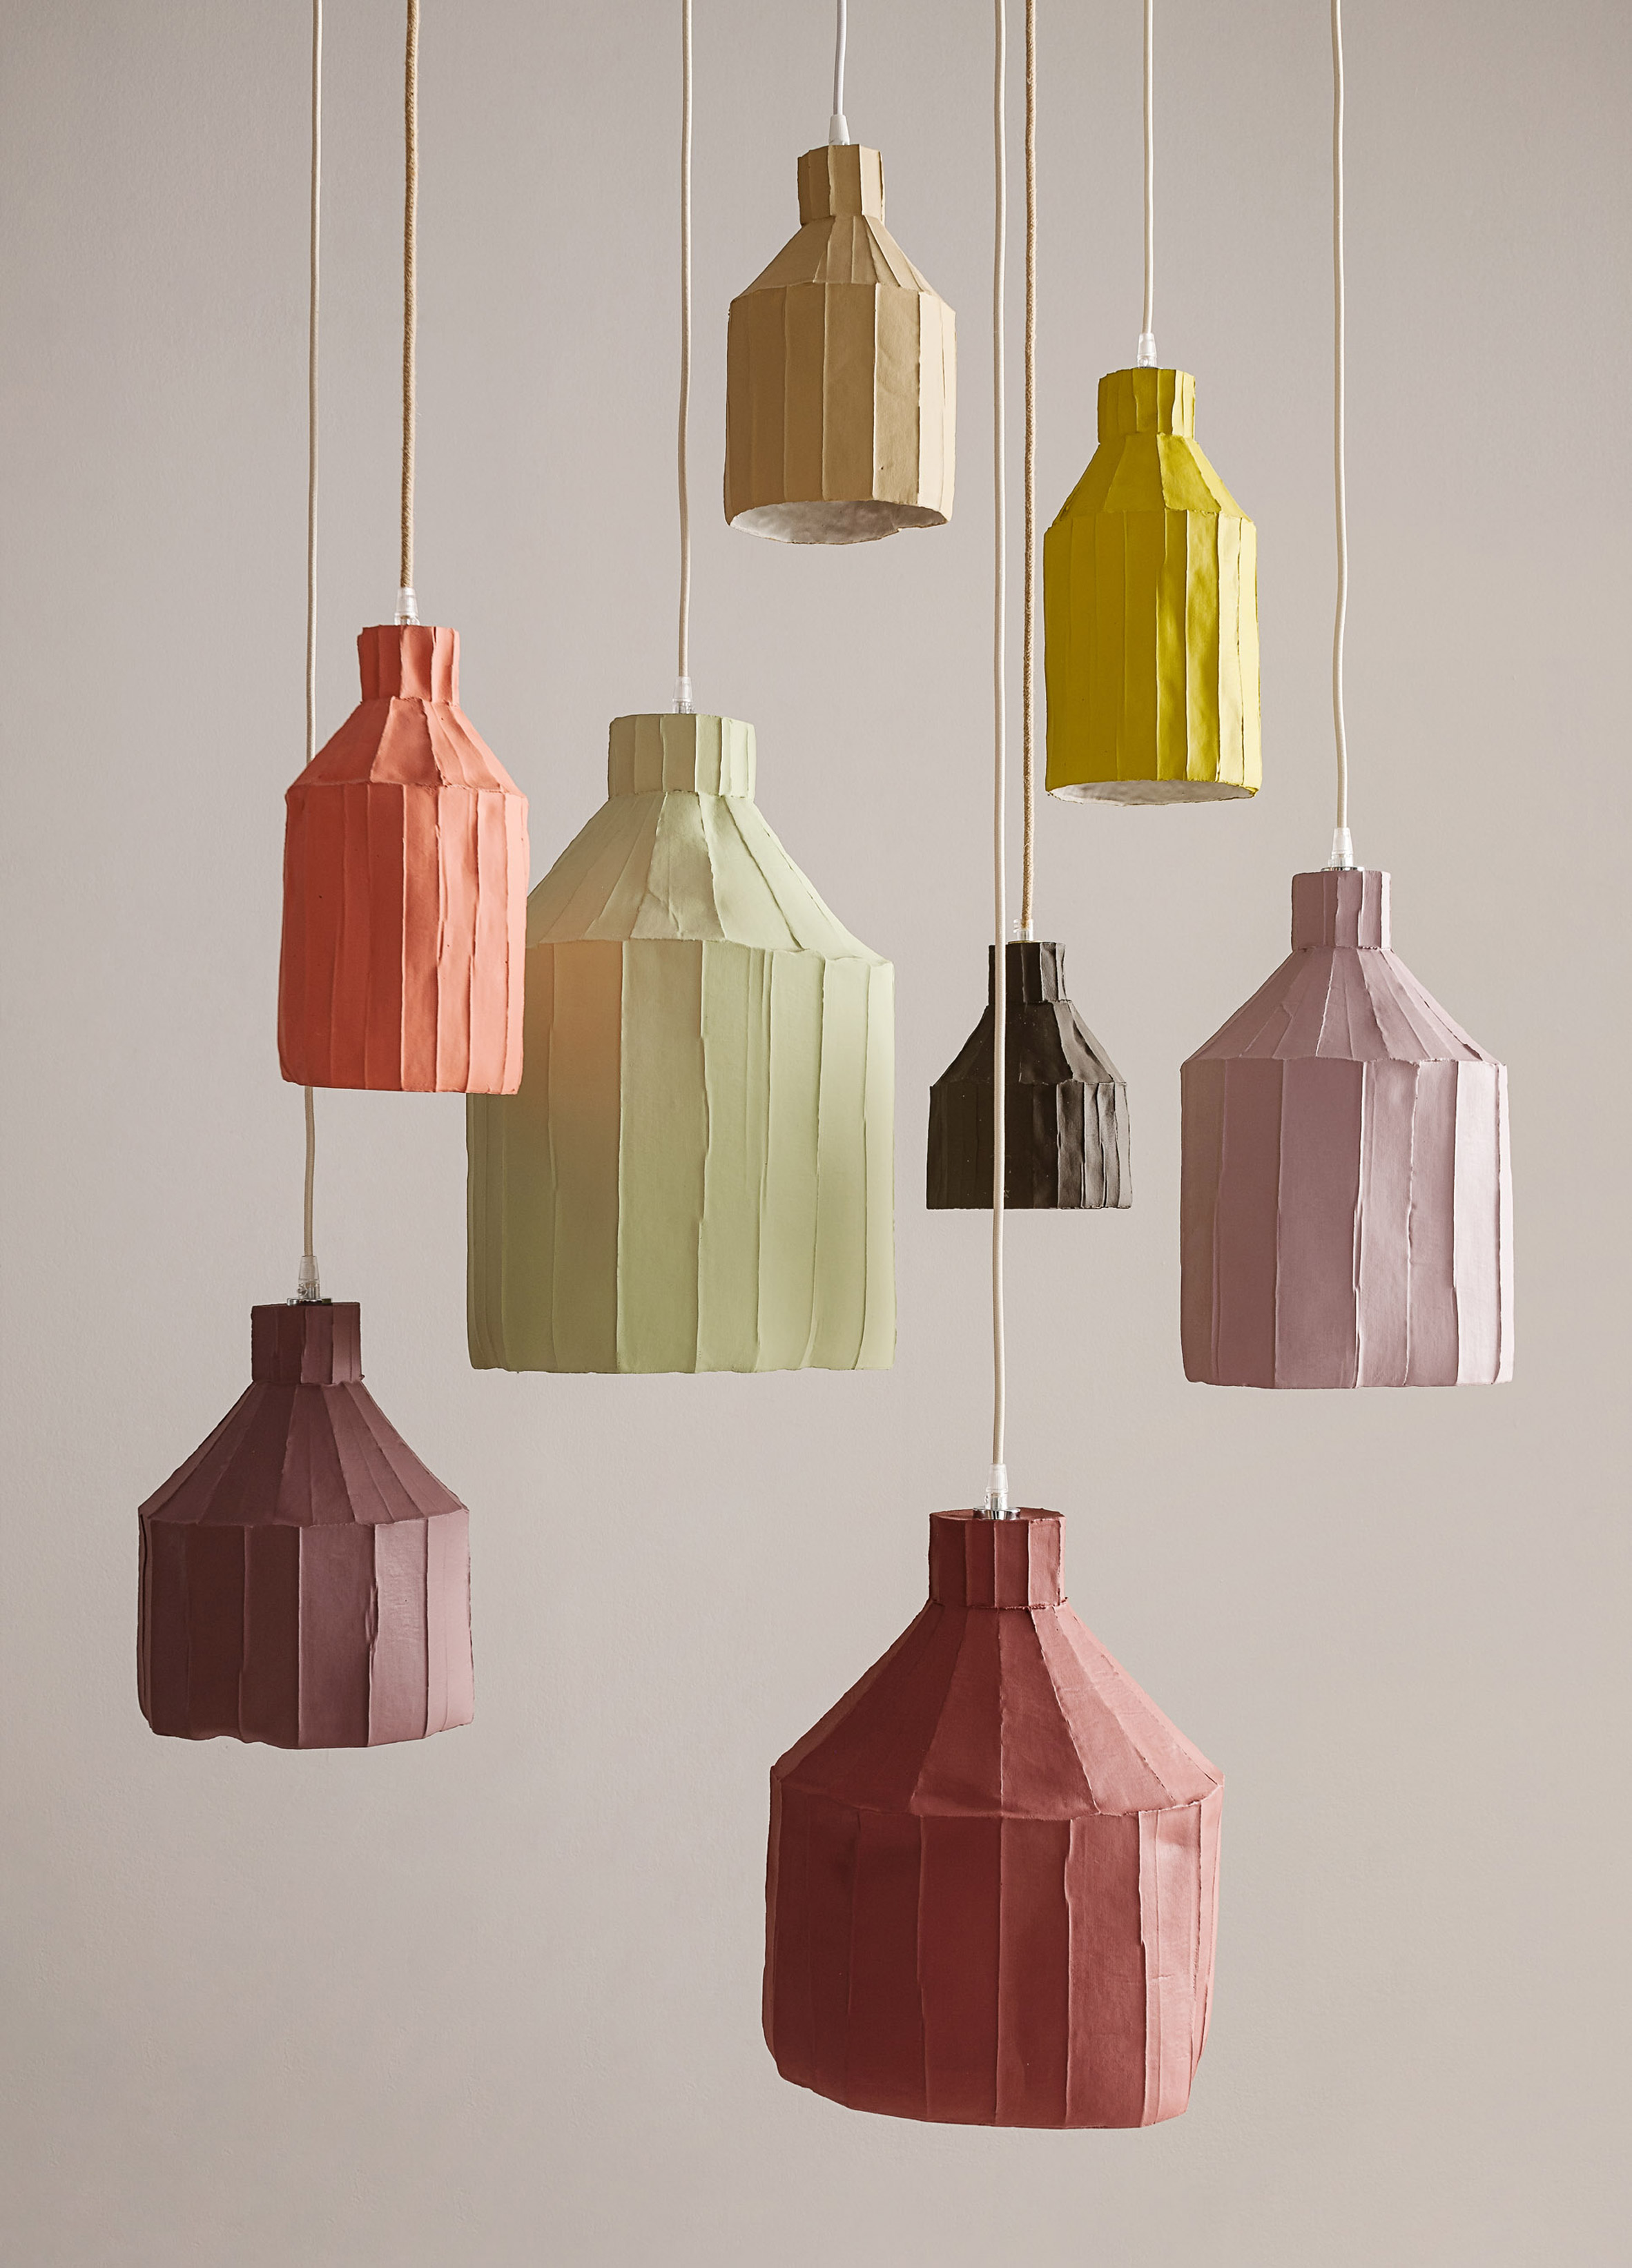 Paper clay lamps by Paola Paronetto